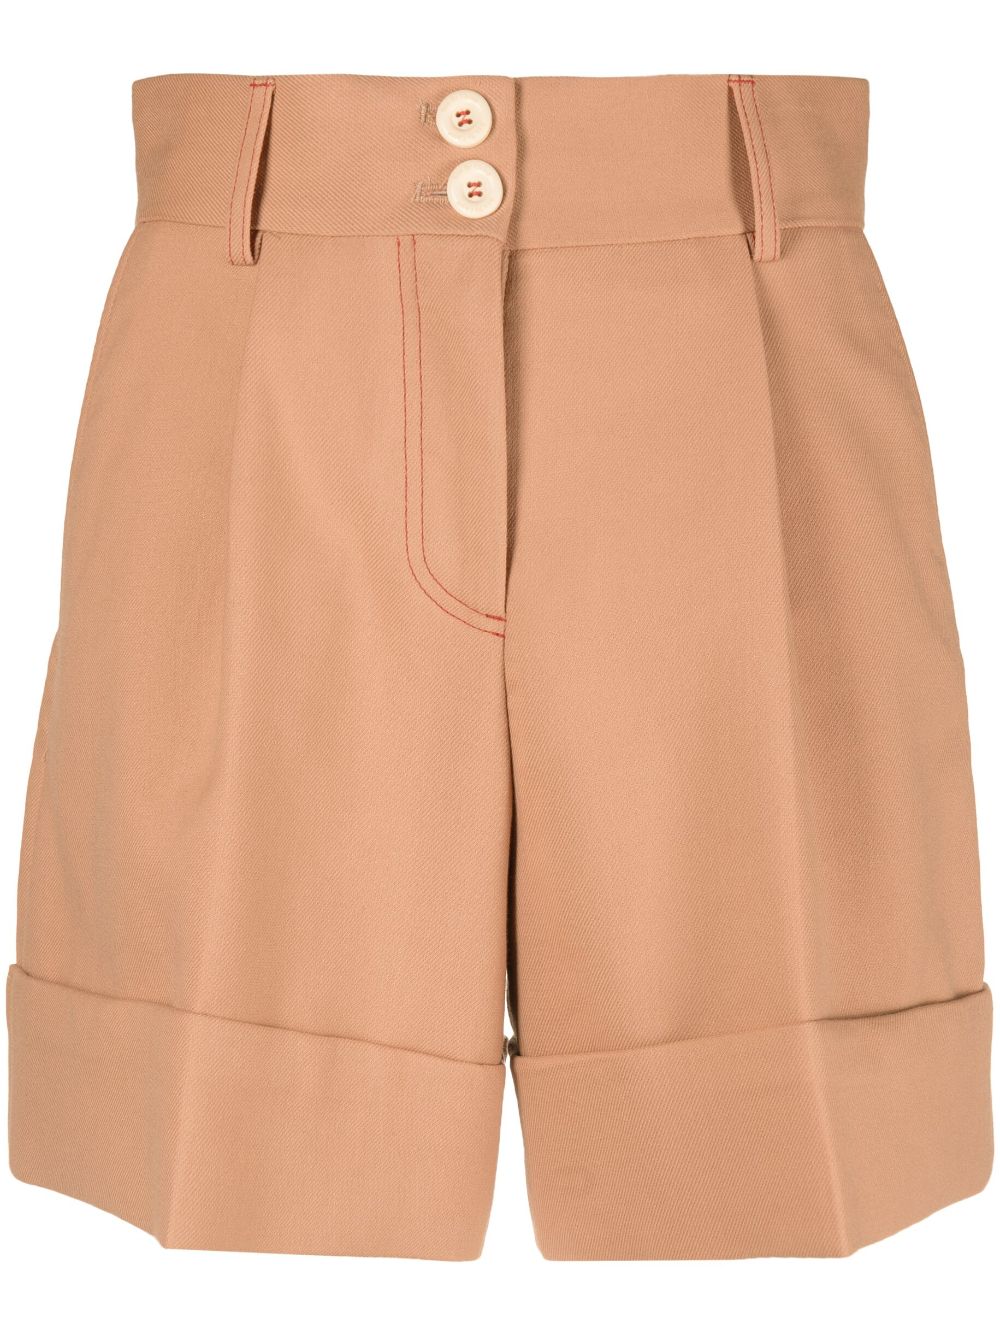 See by Chloé pleated tailored shorts - Neutrals von See by Chloé